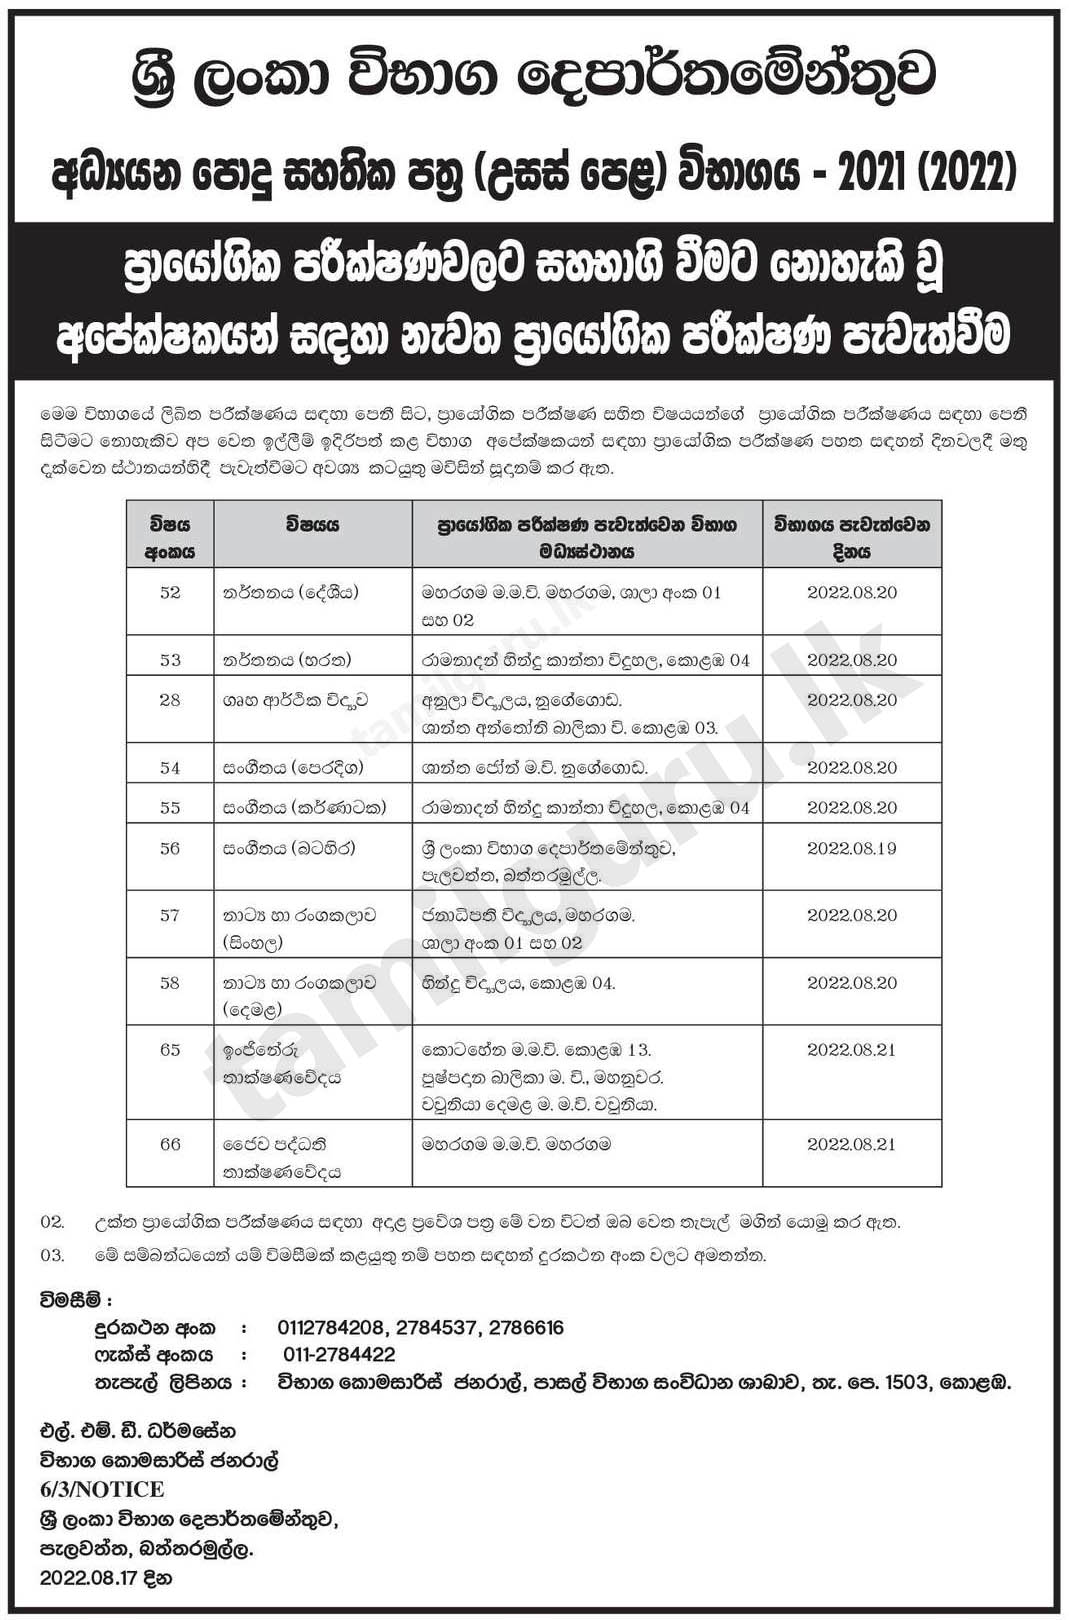 Time Table for Practical Tests (August) - GCE AL Examination 2021 (2022) (Notice in Sinhala)